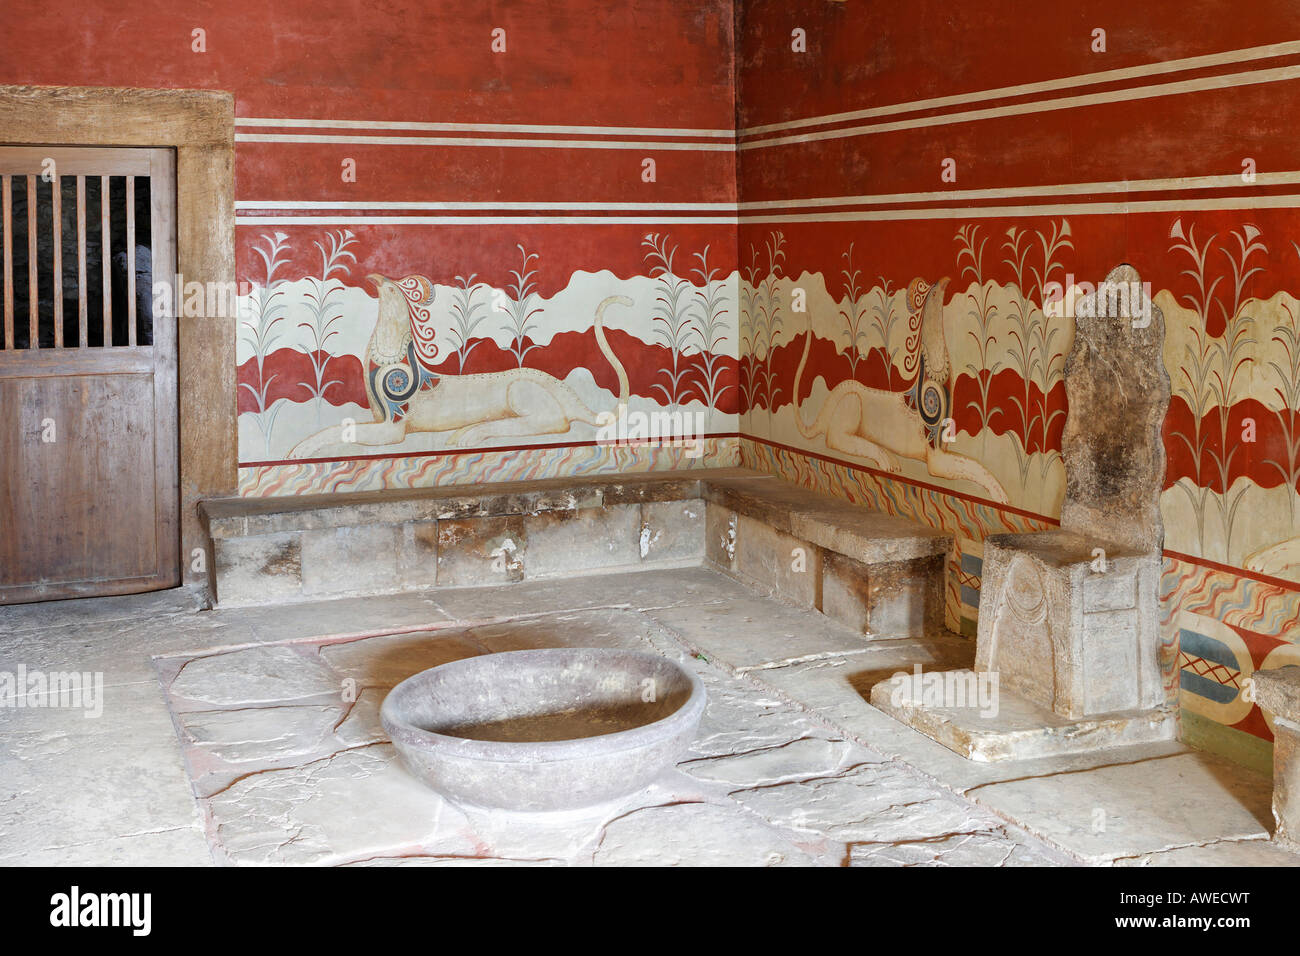 King Minos' alabaster throne surrounded by frescoes depicting chimeric animals in the Palace of Knossos, Crete, Greece, Europe Stock Photo